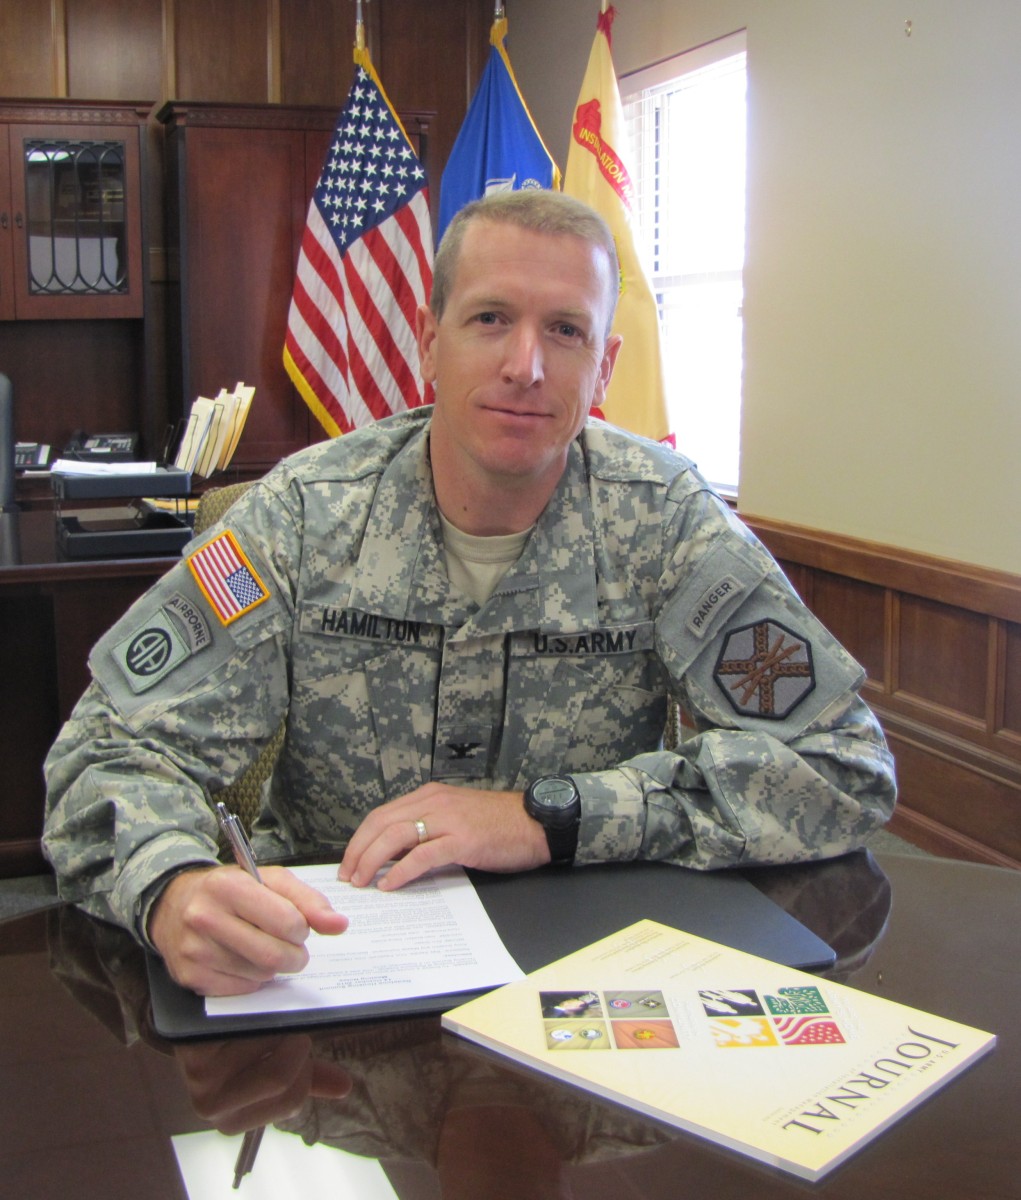 Garrison Commander Leads BRAC Support Article The United States Army